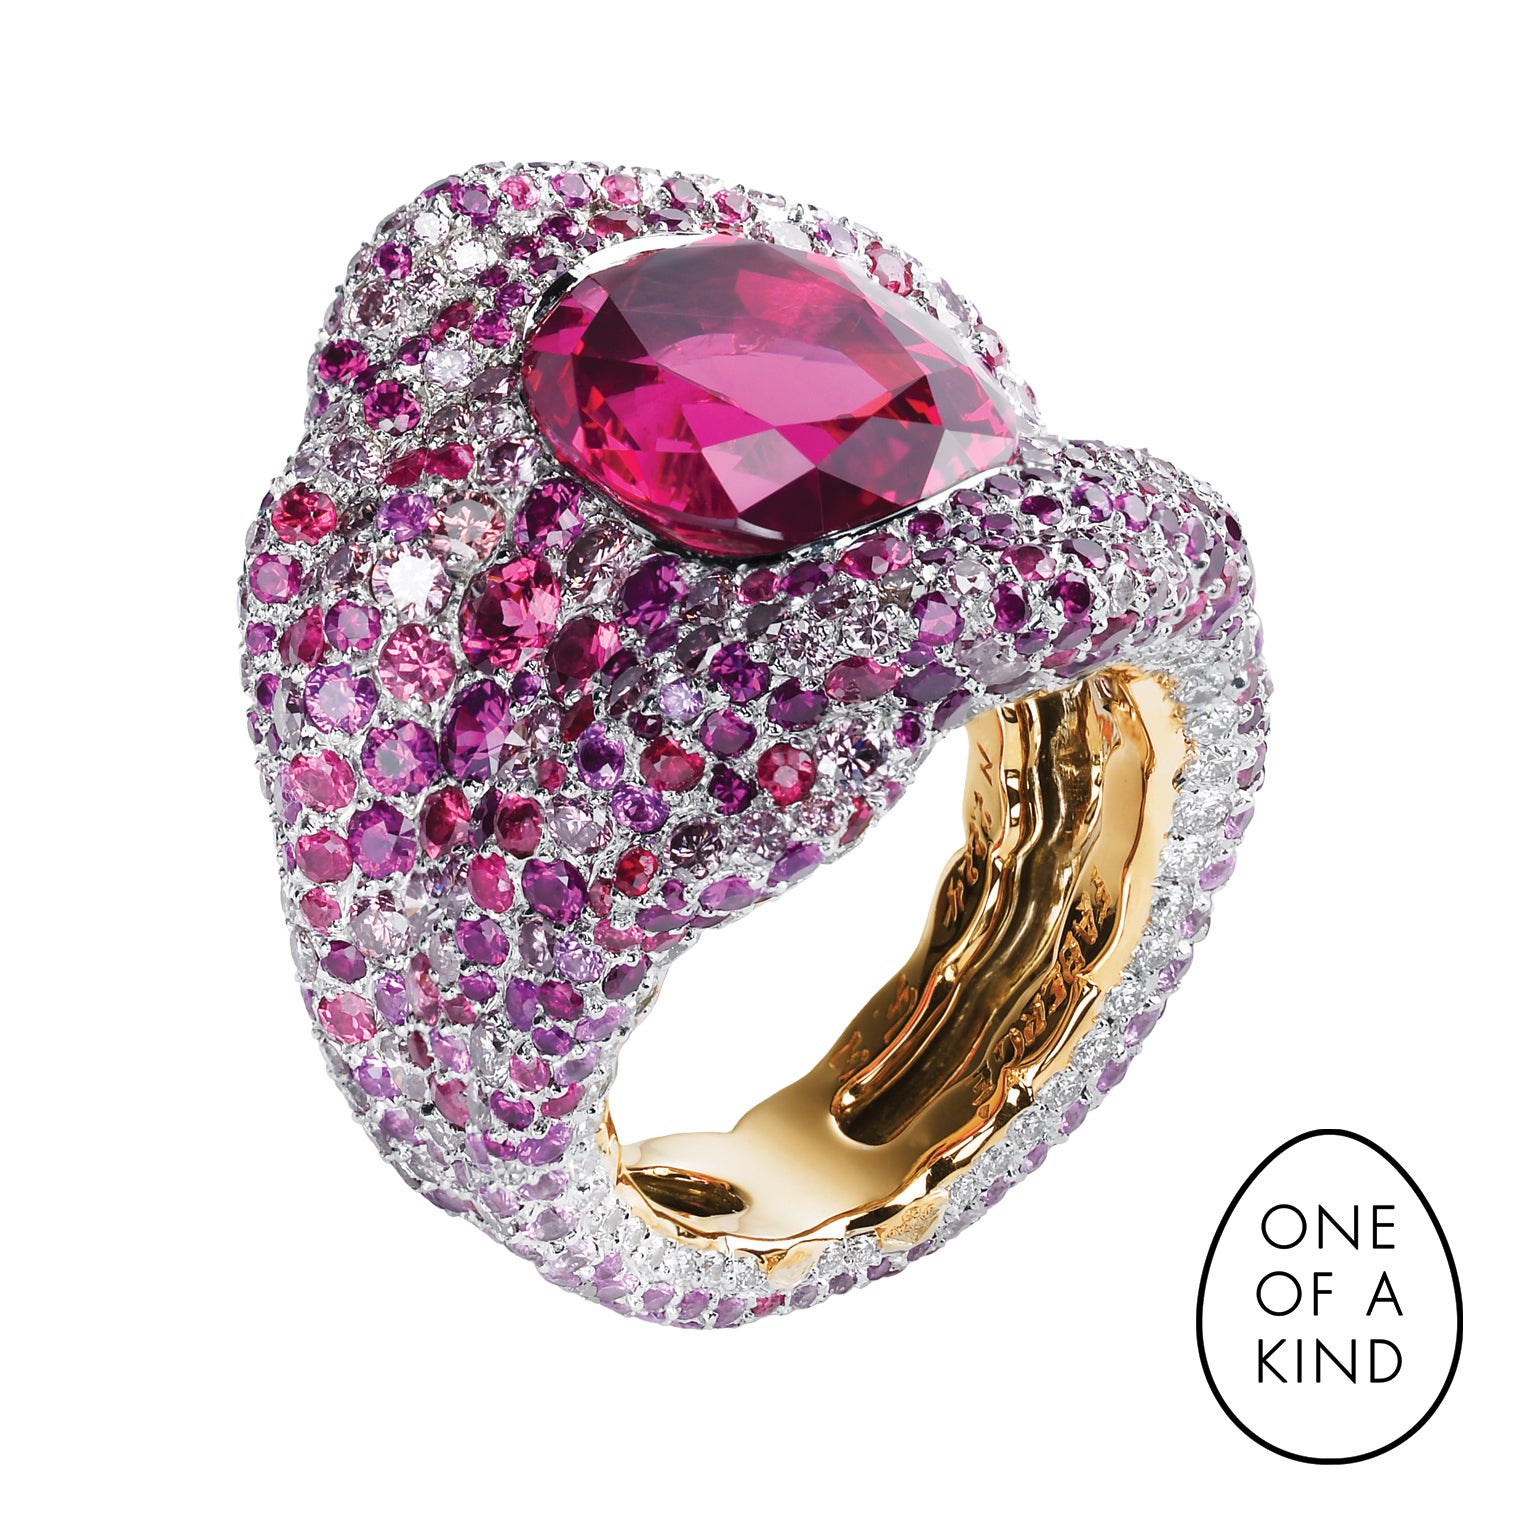 Fabergé Vagabonde 8ct Red Spinel Chunky Ring With Diamonds & Pink Gemstones For Sale